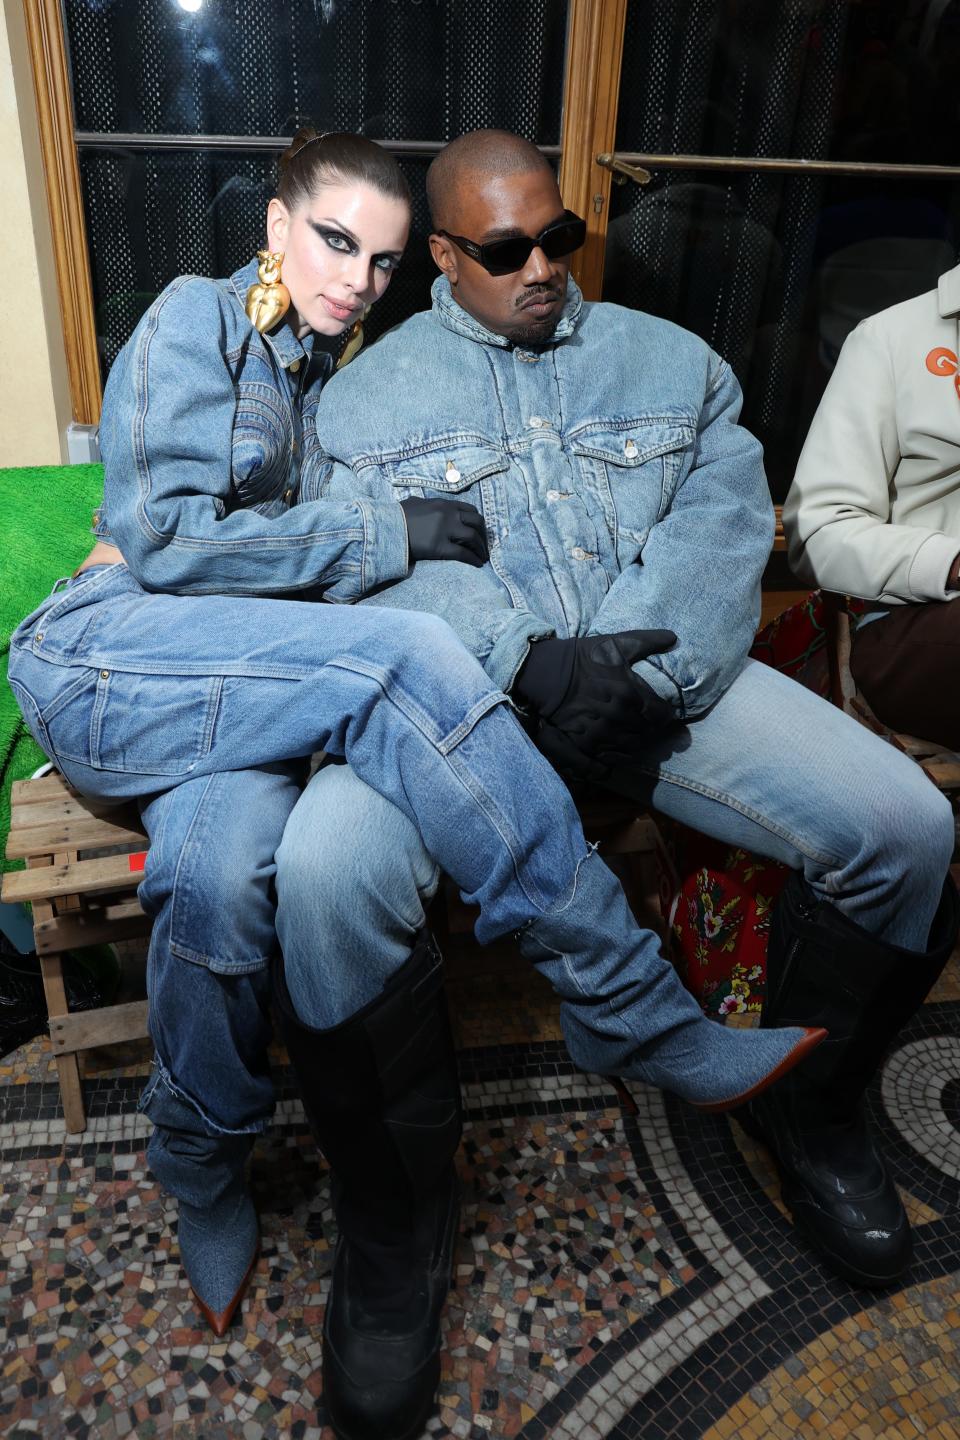 (L to R) Julia Fox and Ye attend the Kenzo Fall/Winter 2022/2023 show as part of Paris Fashion Week on January 23, 2022 in Paris, France.